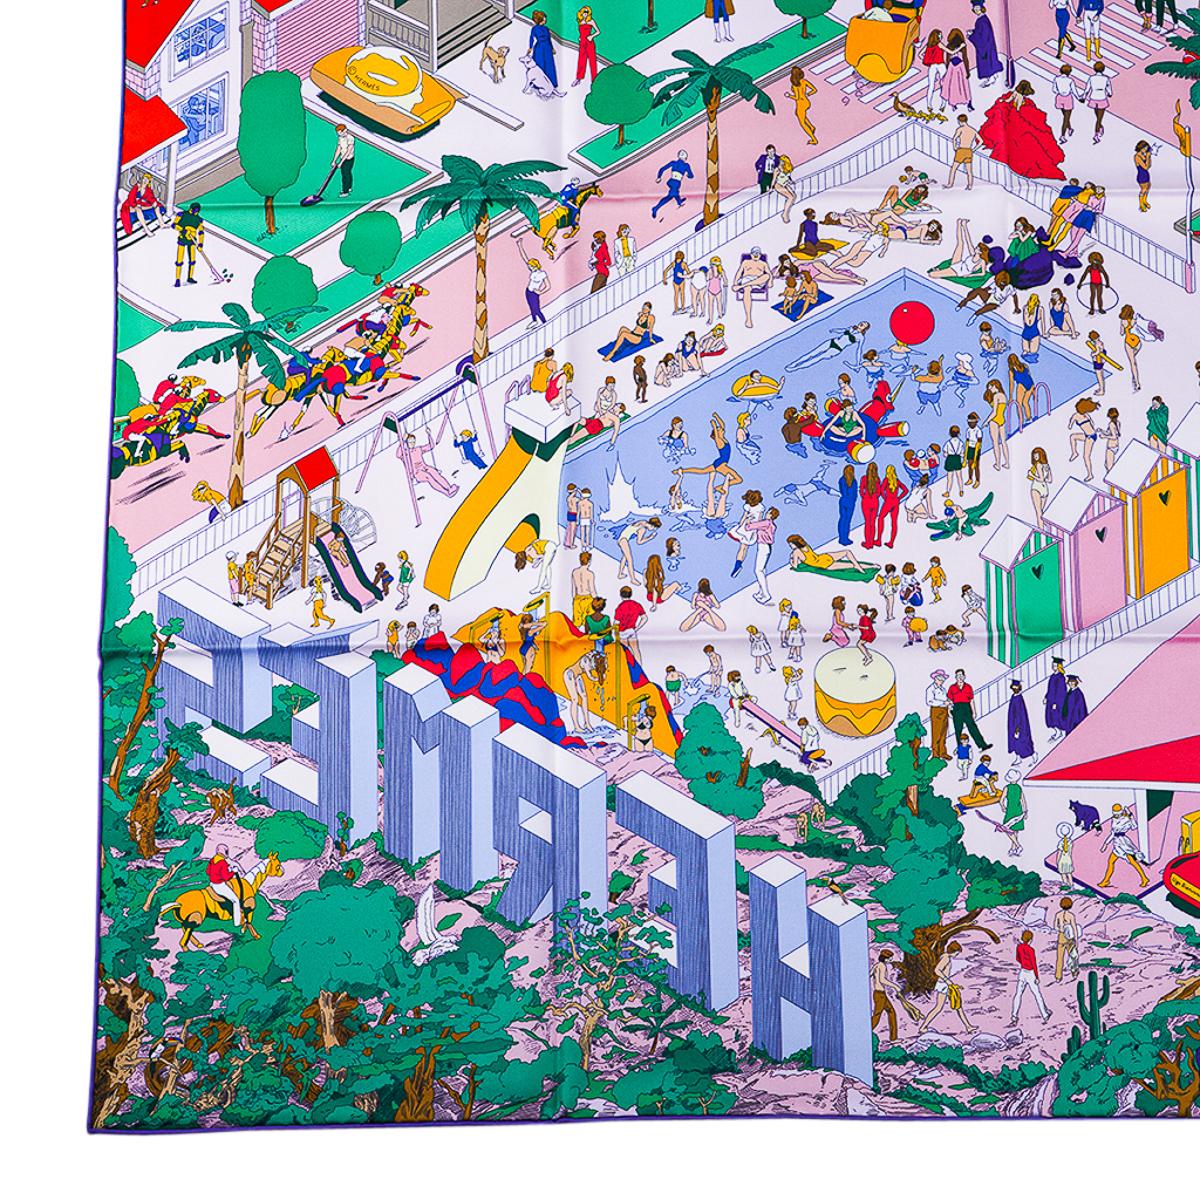 Mightychic offers an Hermes On The Beach scarf in Rose, Vert and Rouge colorway.
In the style of an American comic, this futuristic display of summer holidays by the sea is filled with details.
From horse races, to mermaids, super heroes flying over